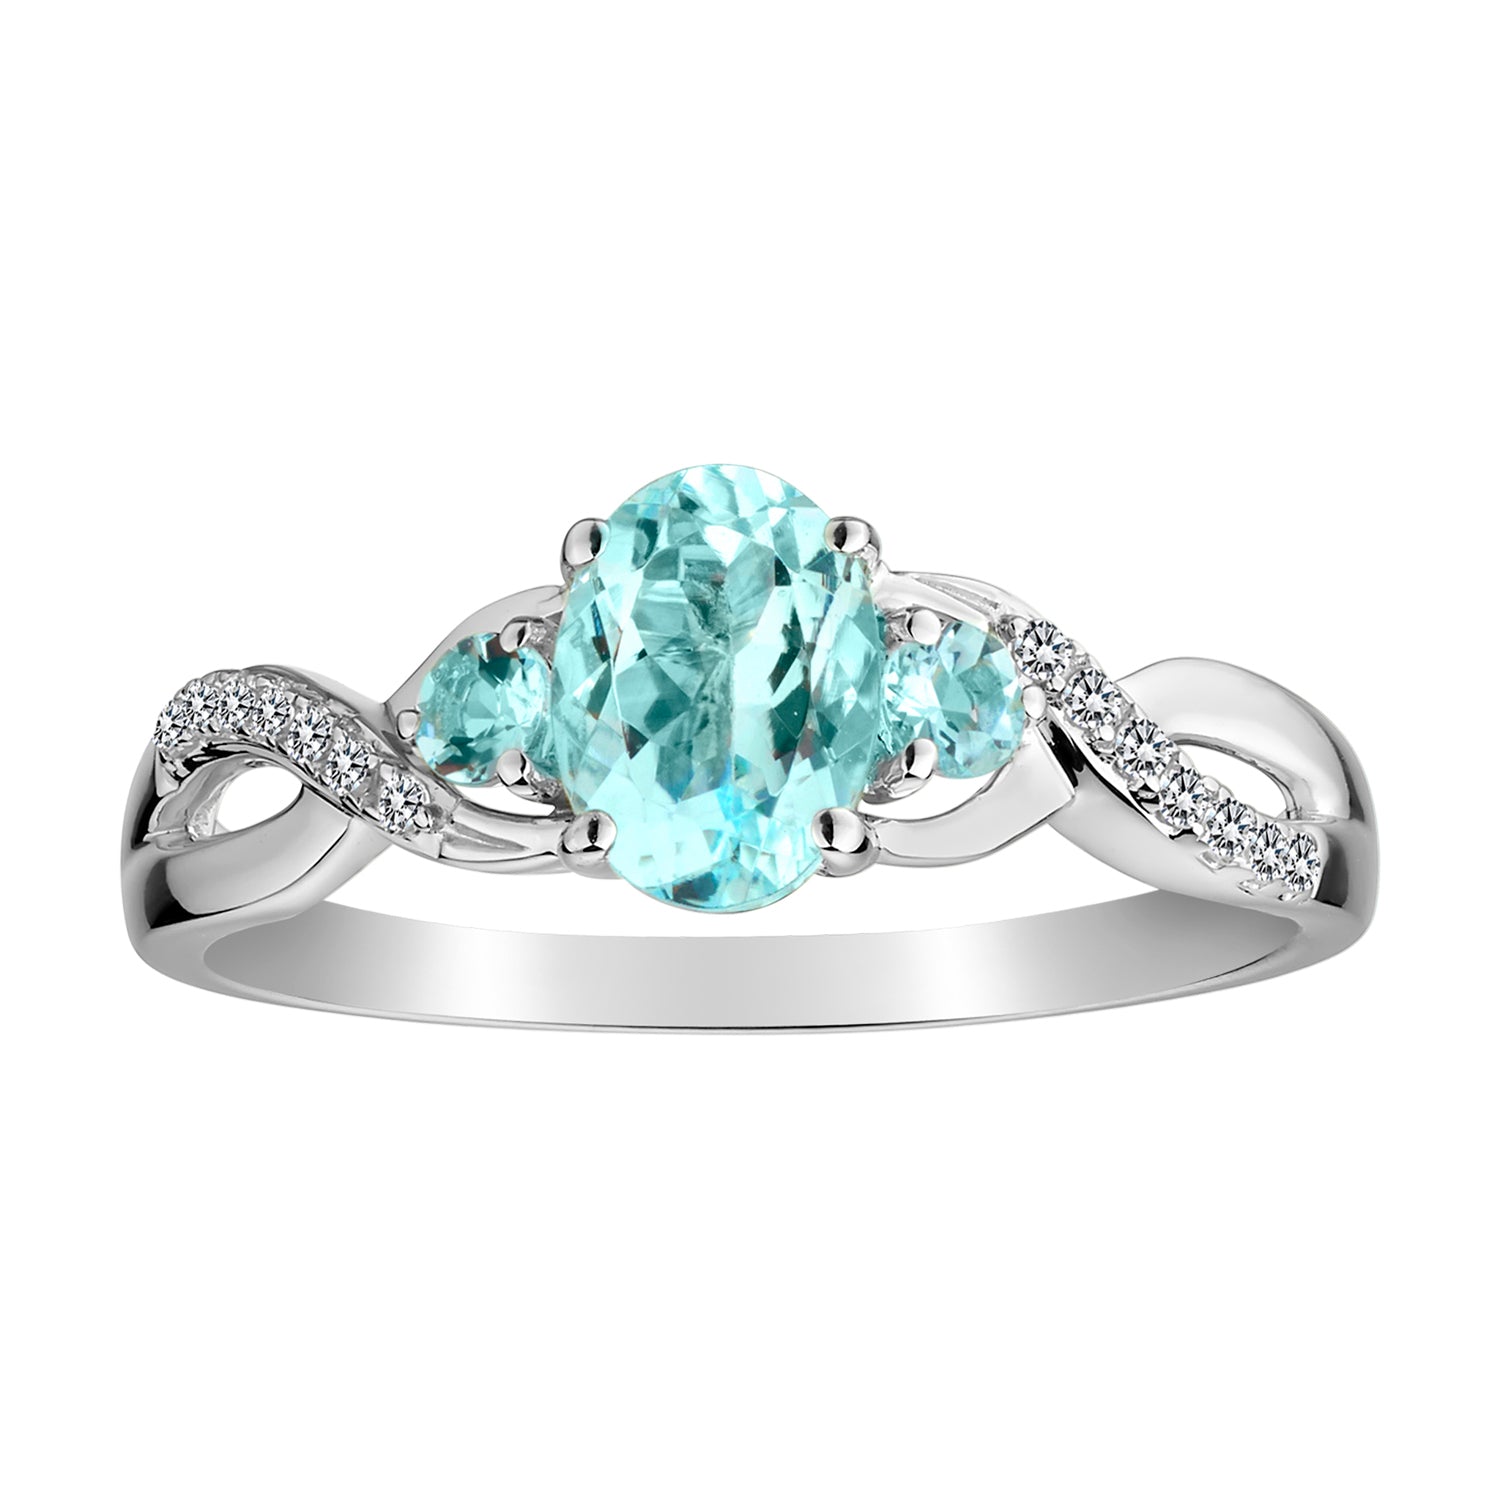 Genuine Aquamarine & White Sapphire Ring,  Sterling Silver. Gemstone Rings. Griffin Jewellery Designs